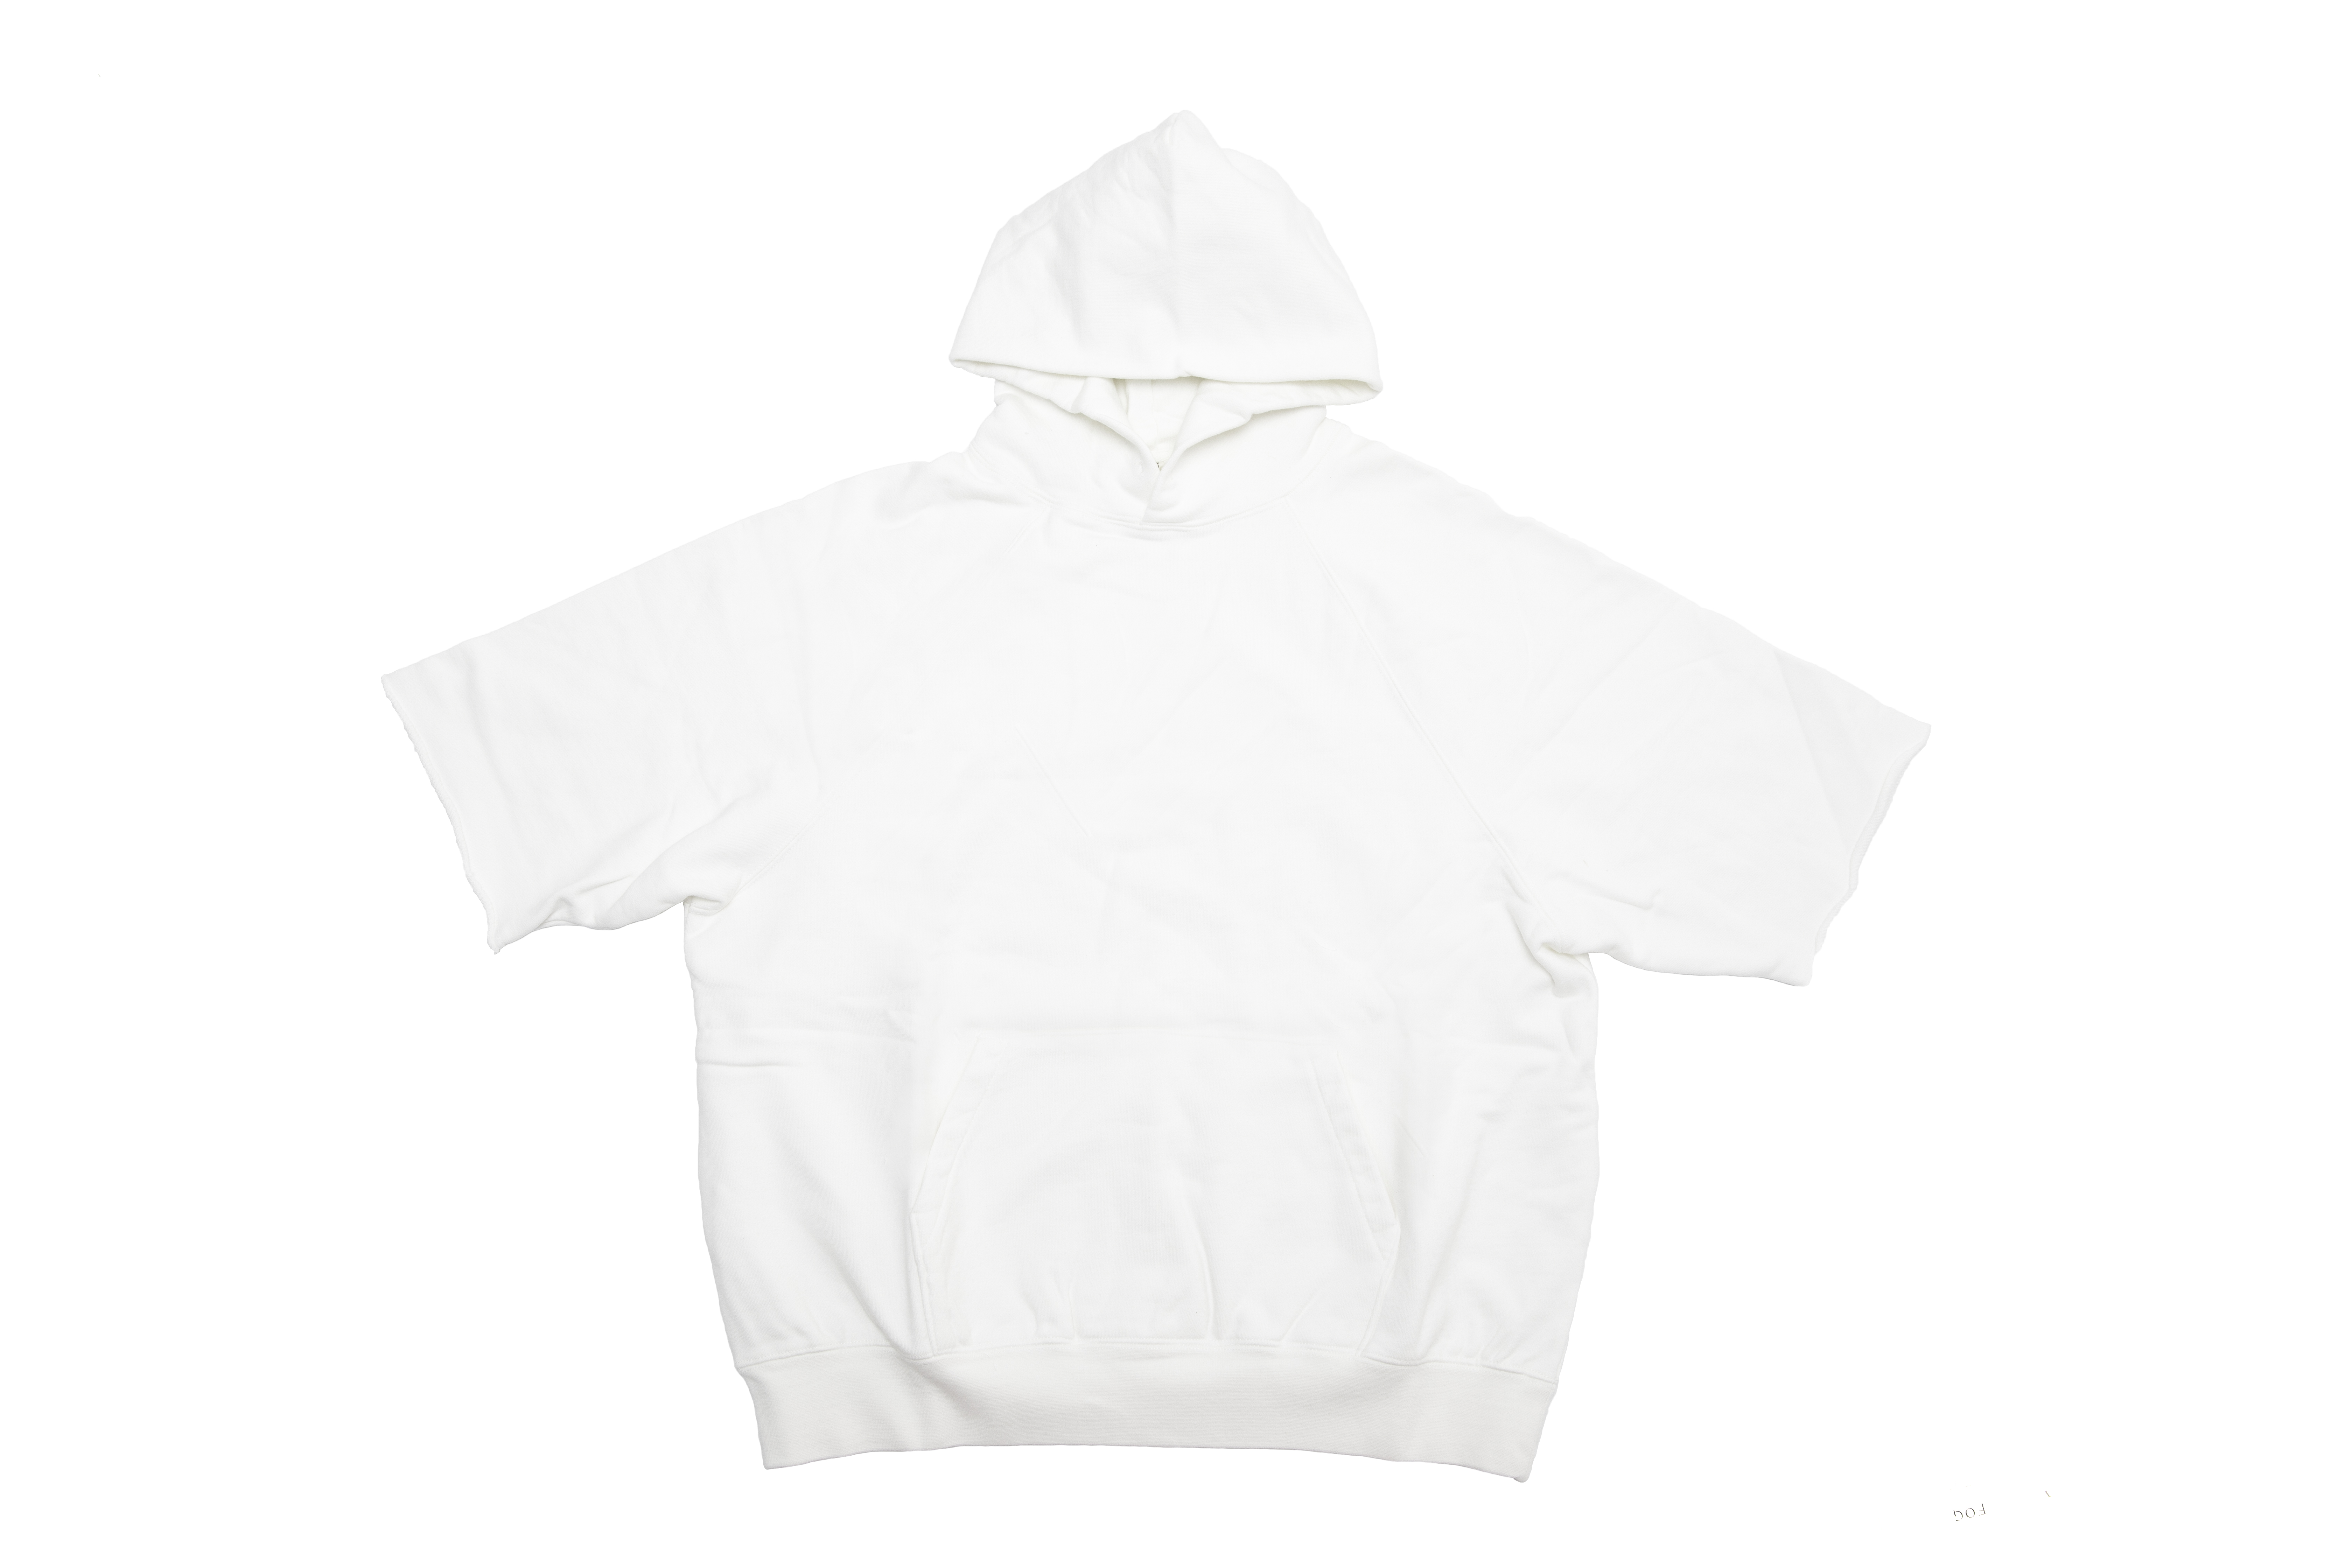 fear of god essentials pullover hoodie harvest